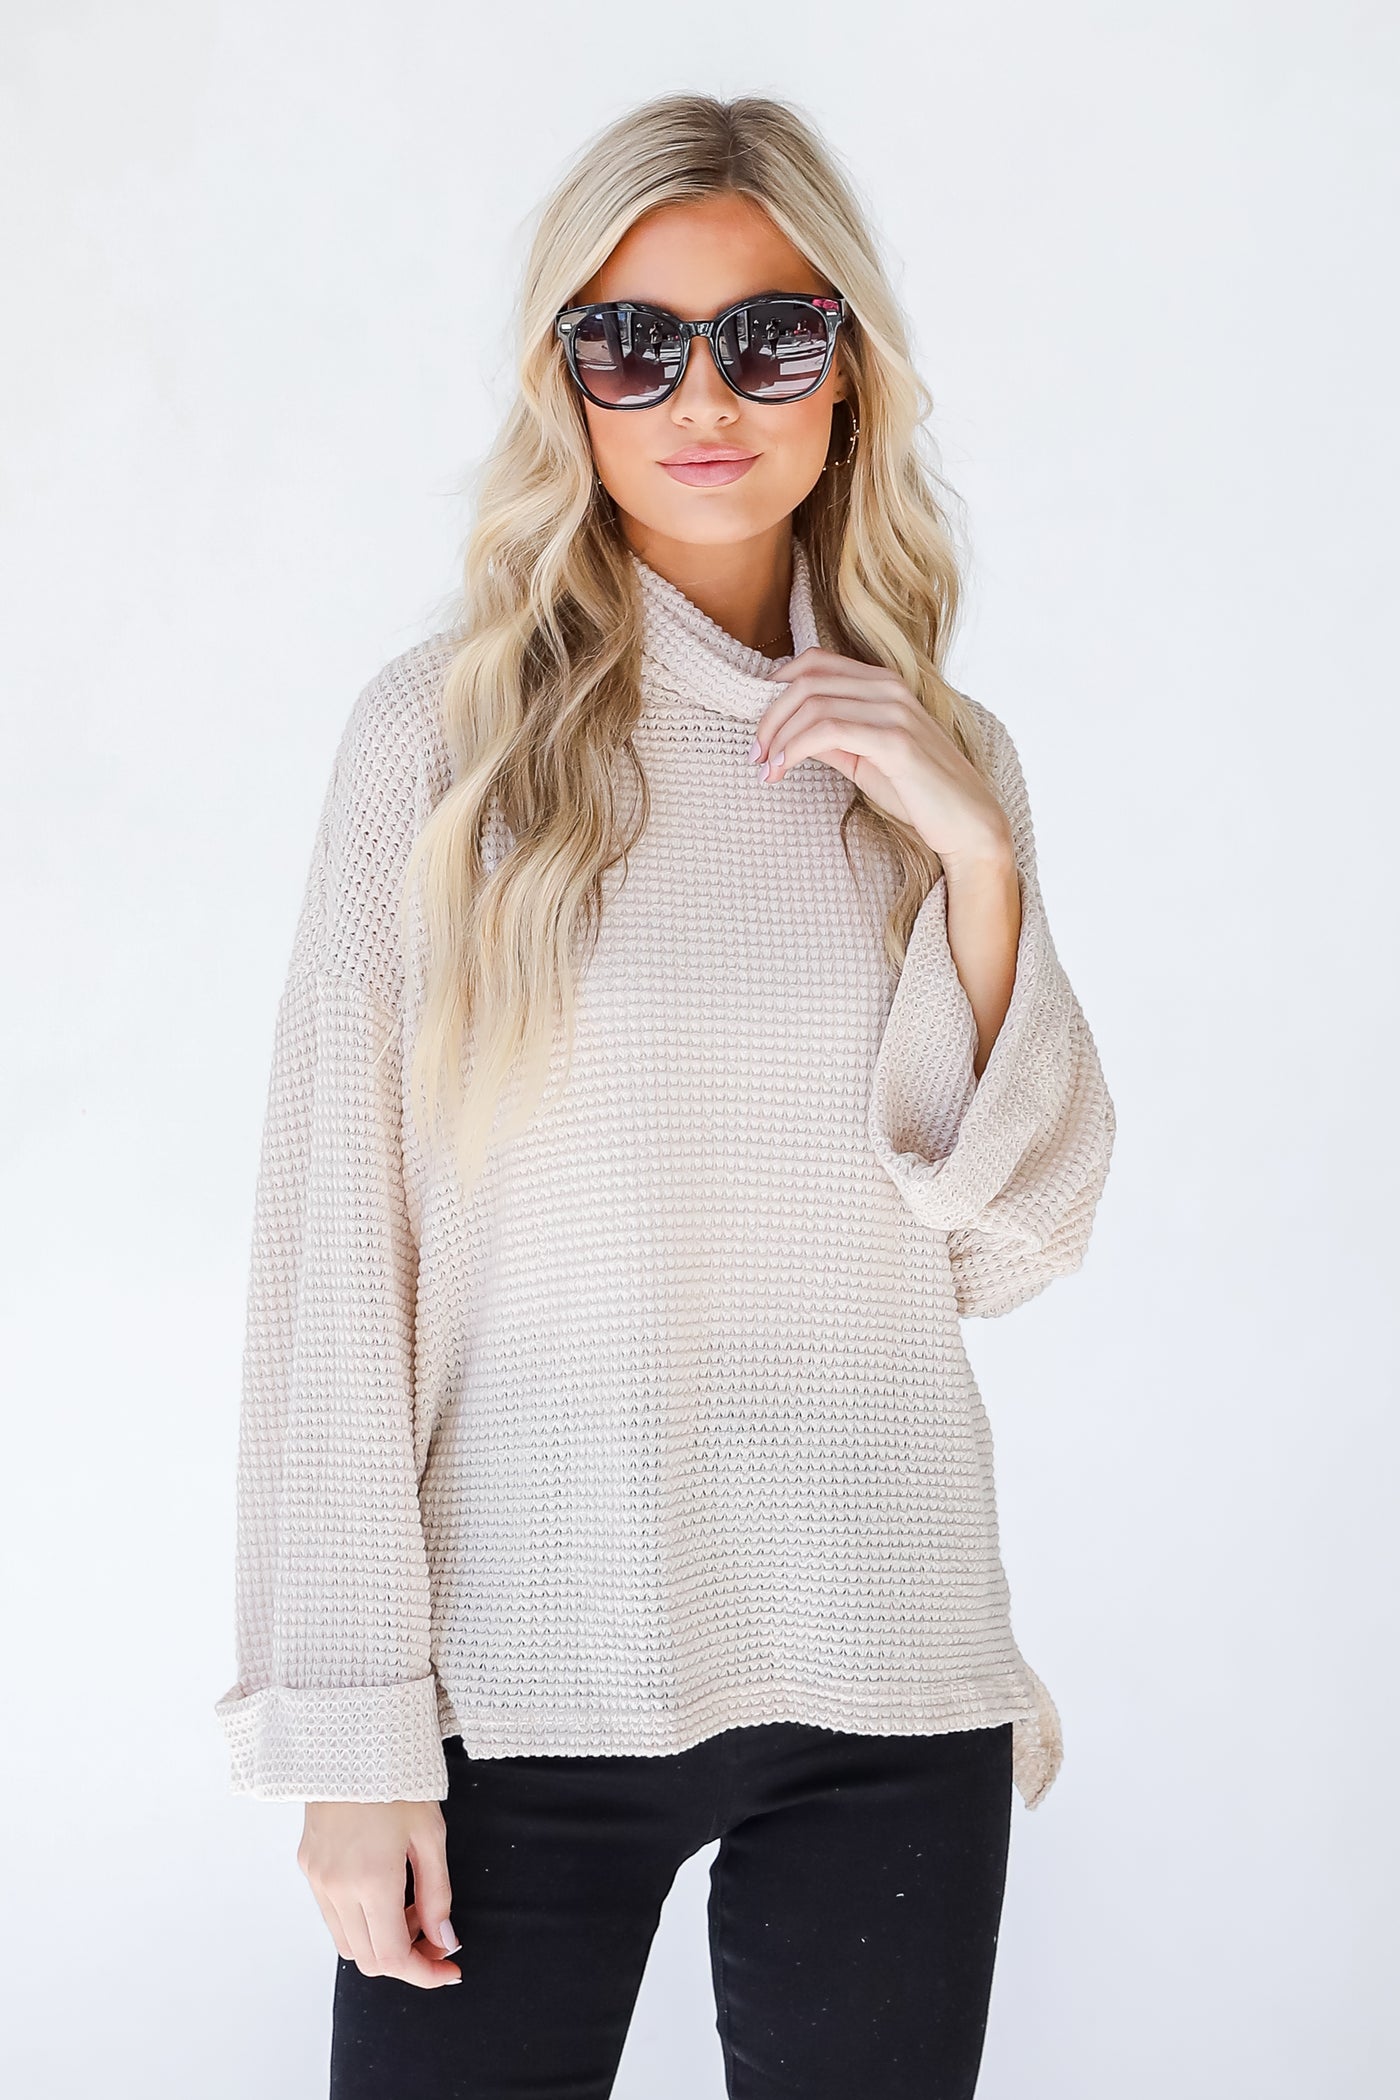 Waffle Knit Top in taupe front view